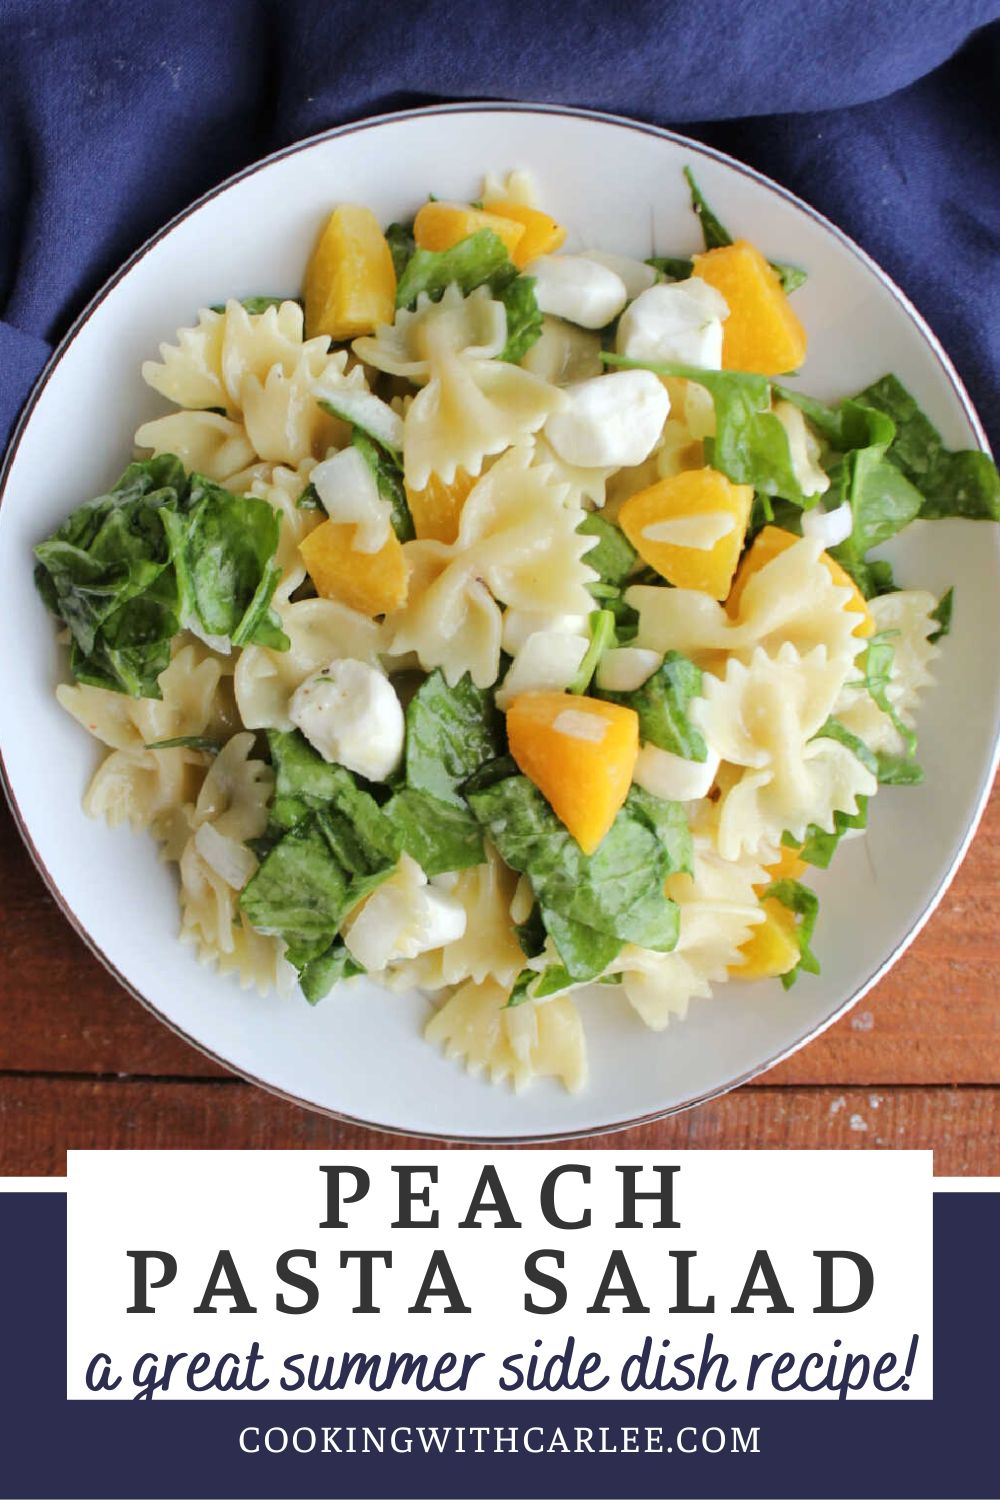 Peach pasta salad is a perfect summer side dish or a great light lunch. The homemade peach vinaigrette is yummy too. Make an extra batch to use on green salads as well.